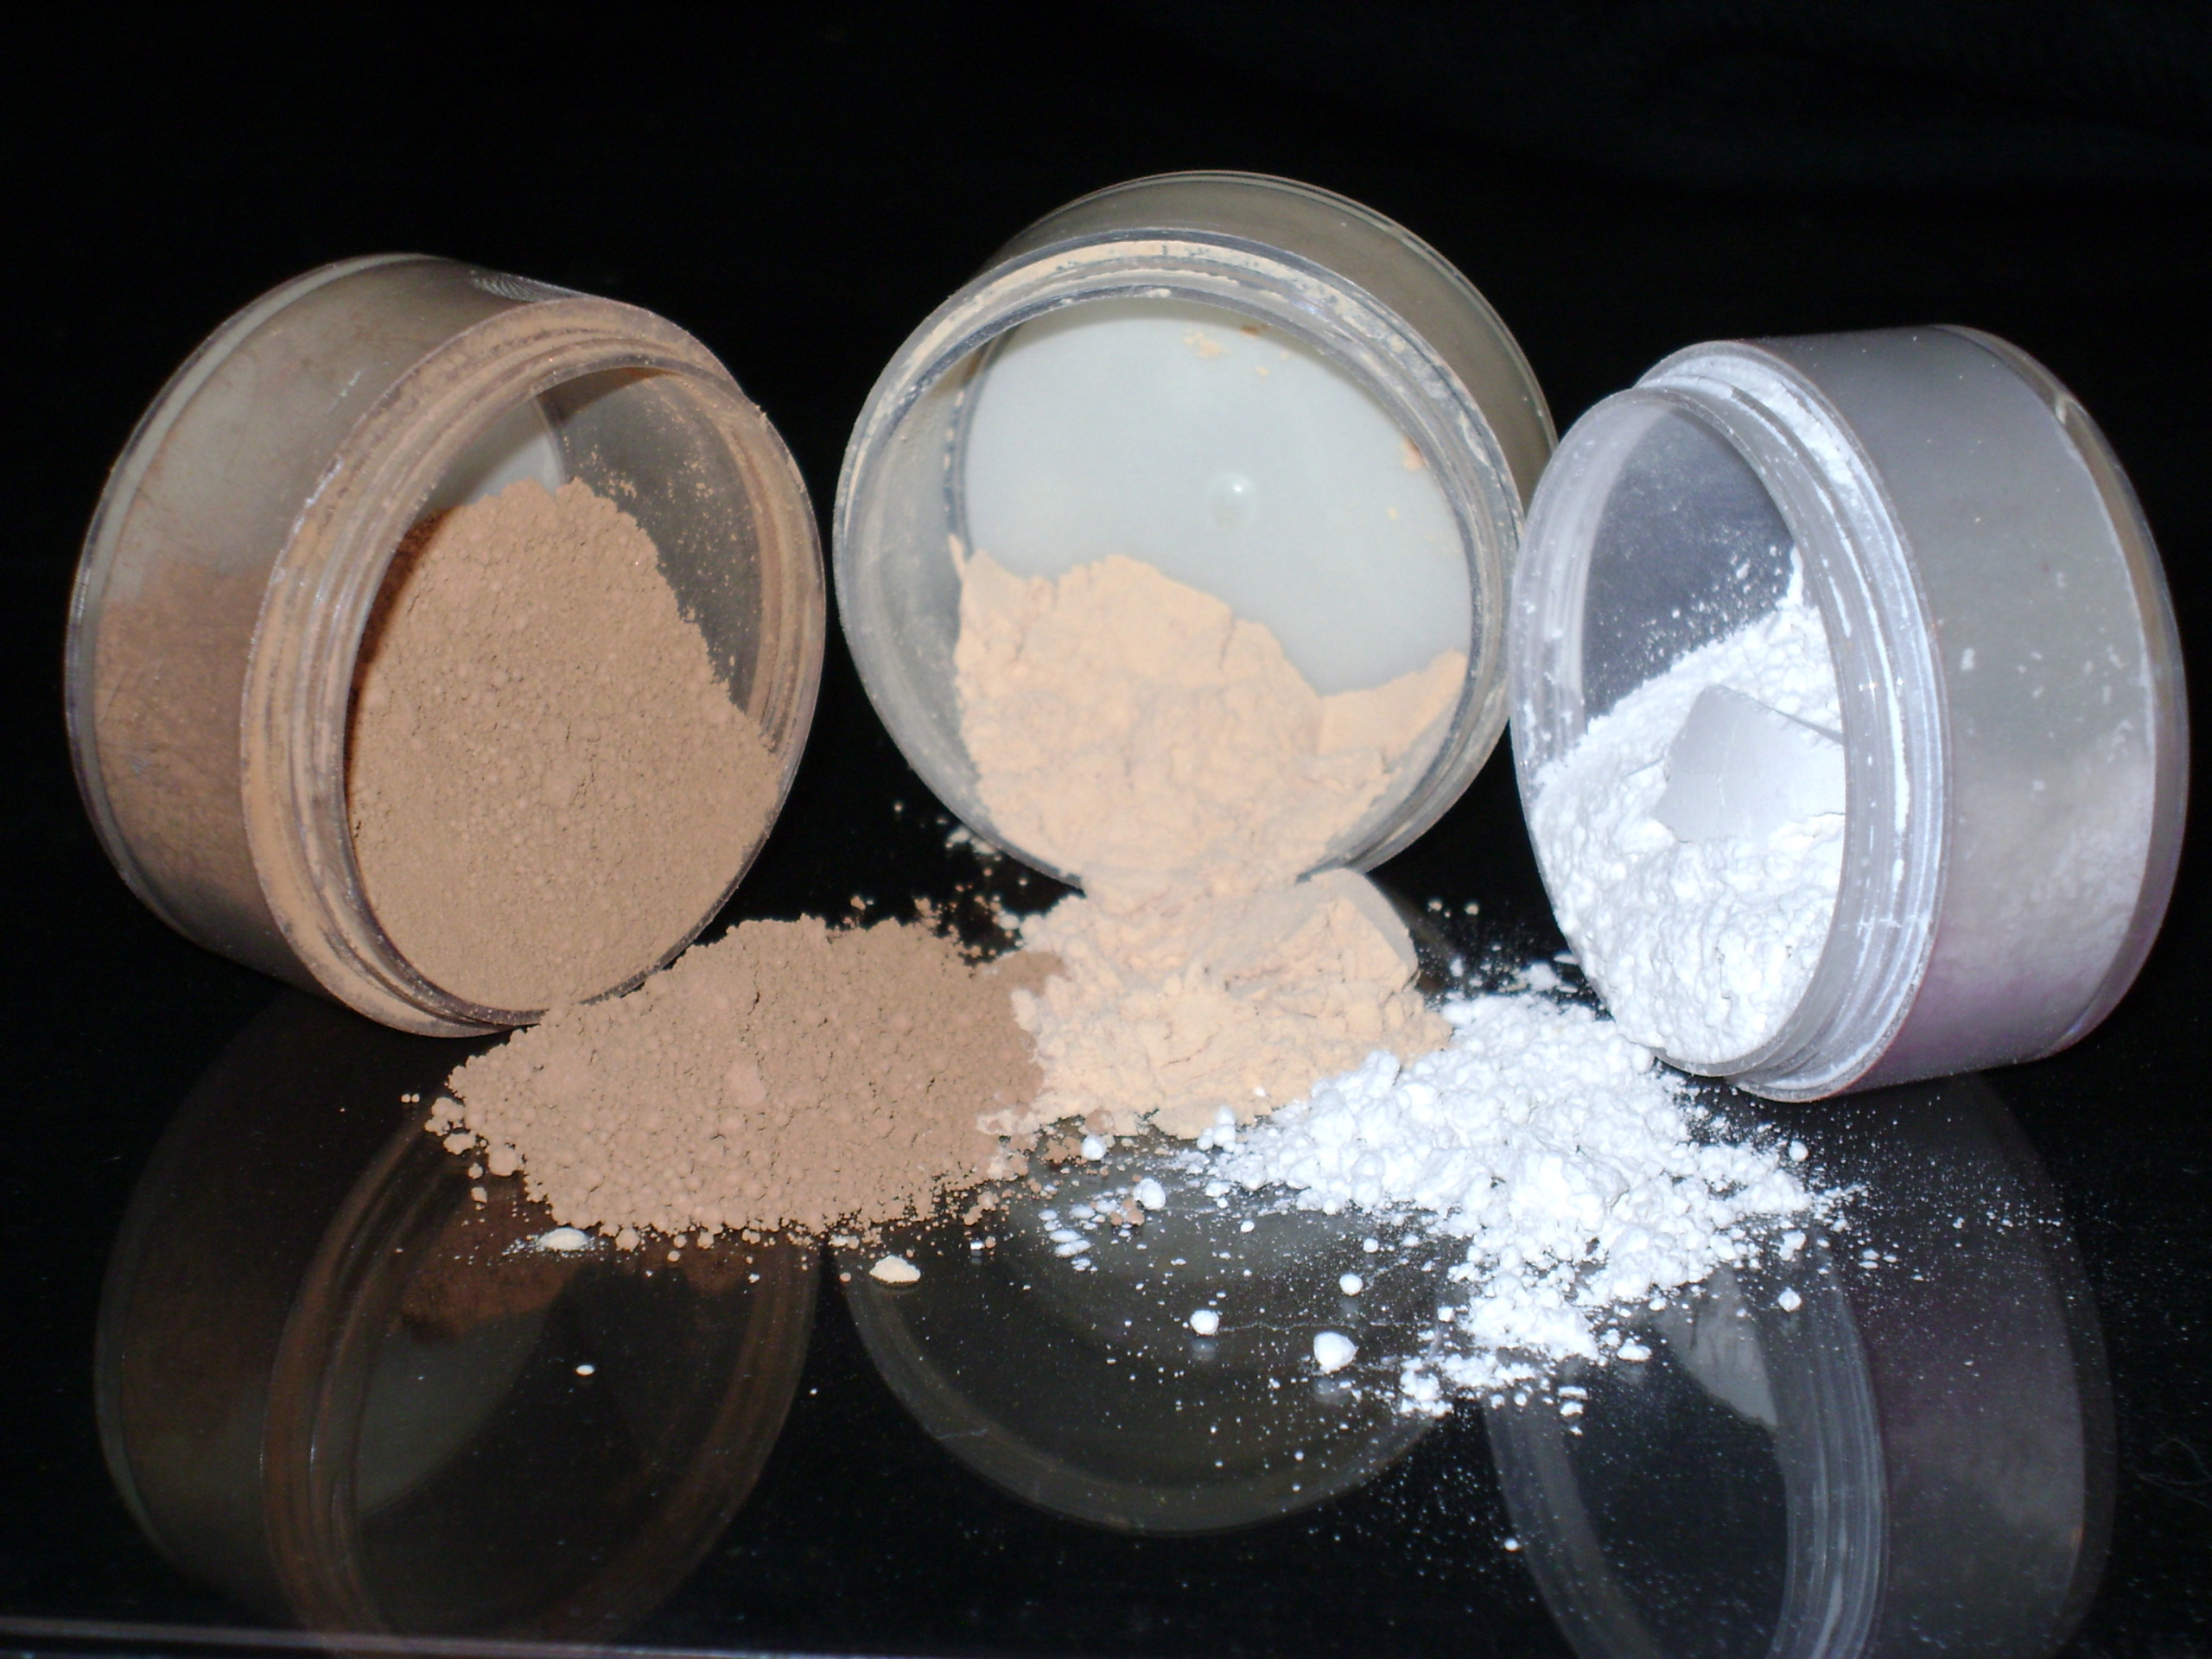 Three containers of powdery makeup CC via Wikimedia Commons